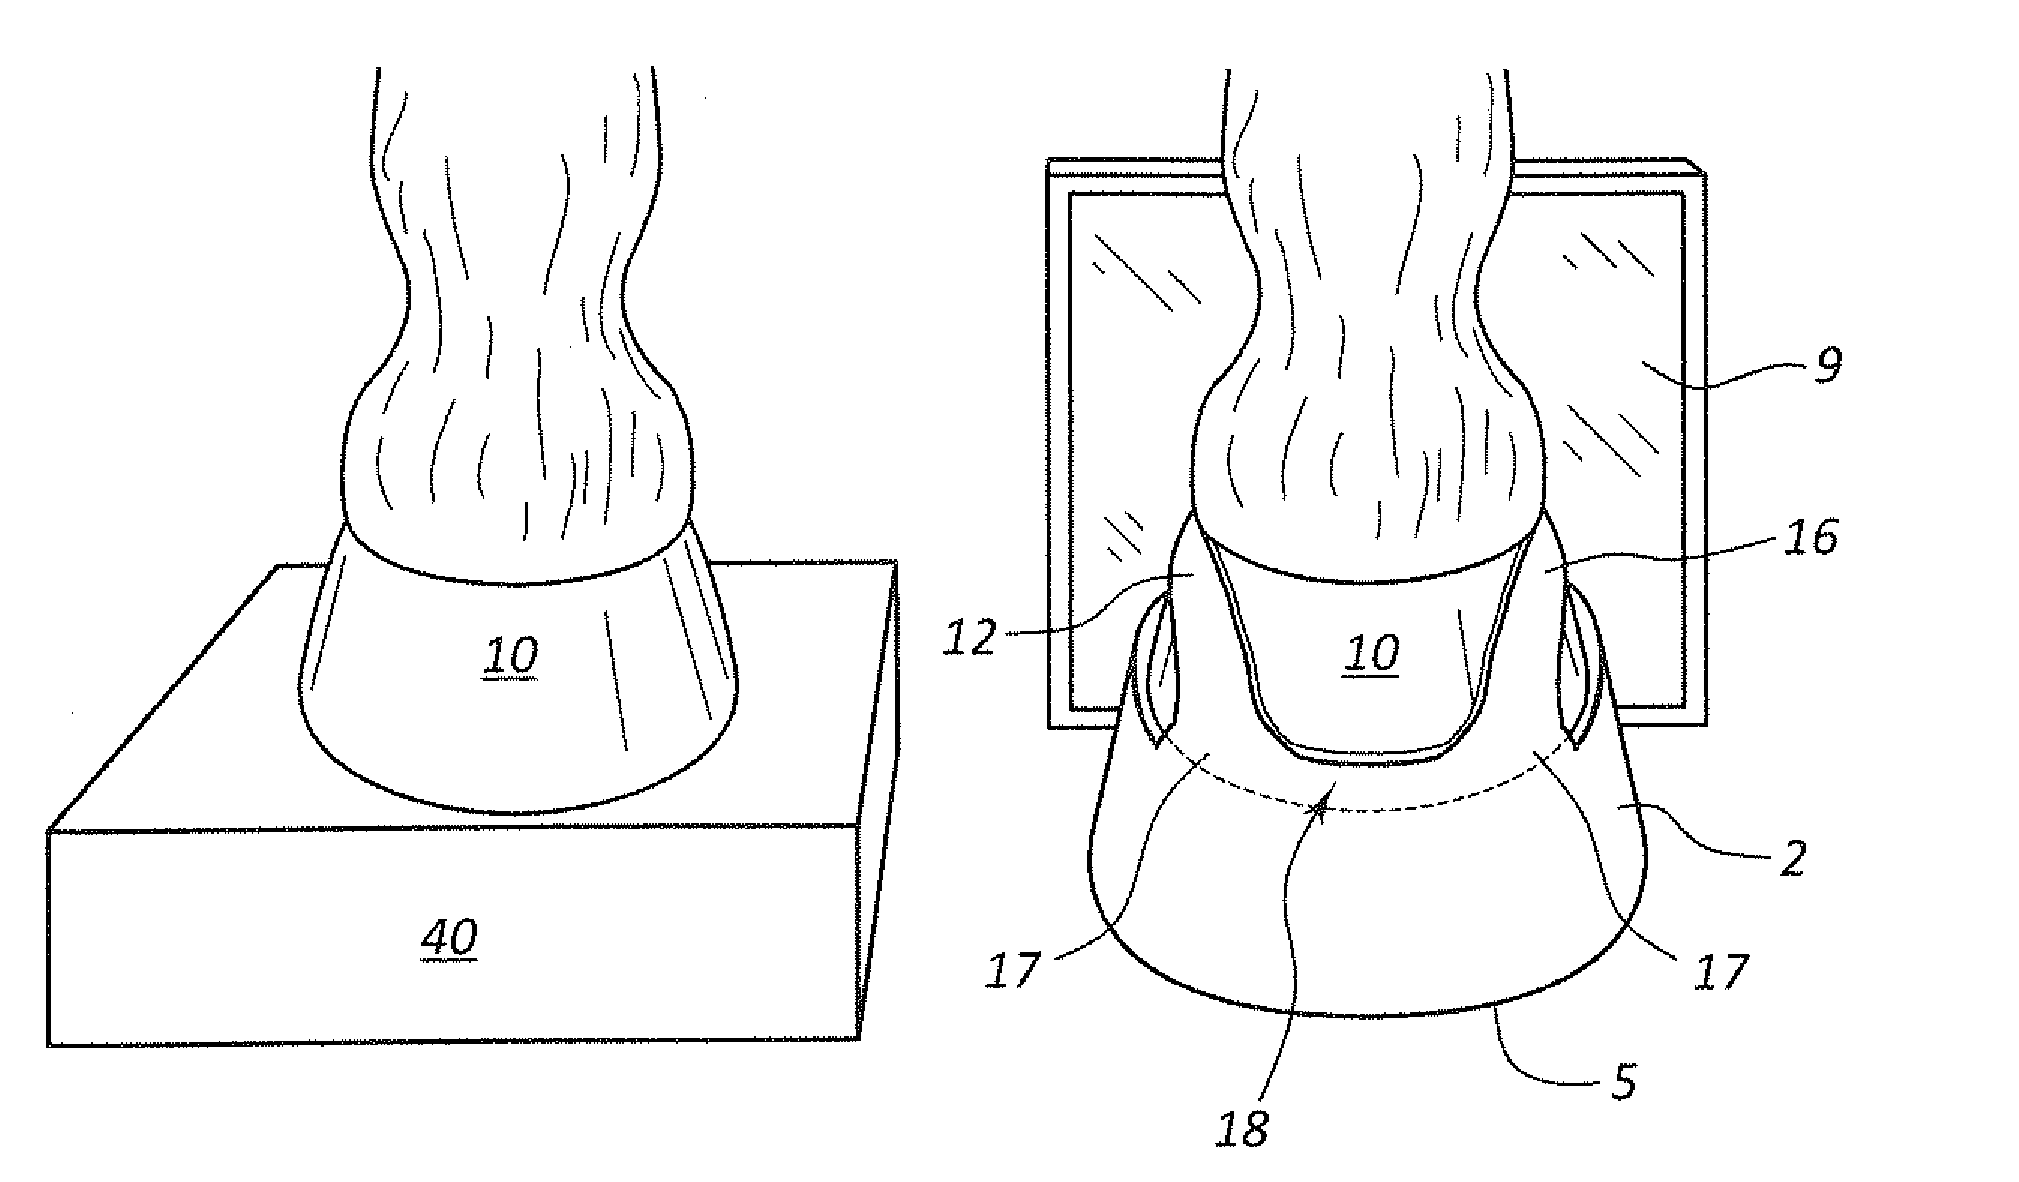 Method And Apparatus For Positioning A Horse's Foot For Radiographic Examination